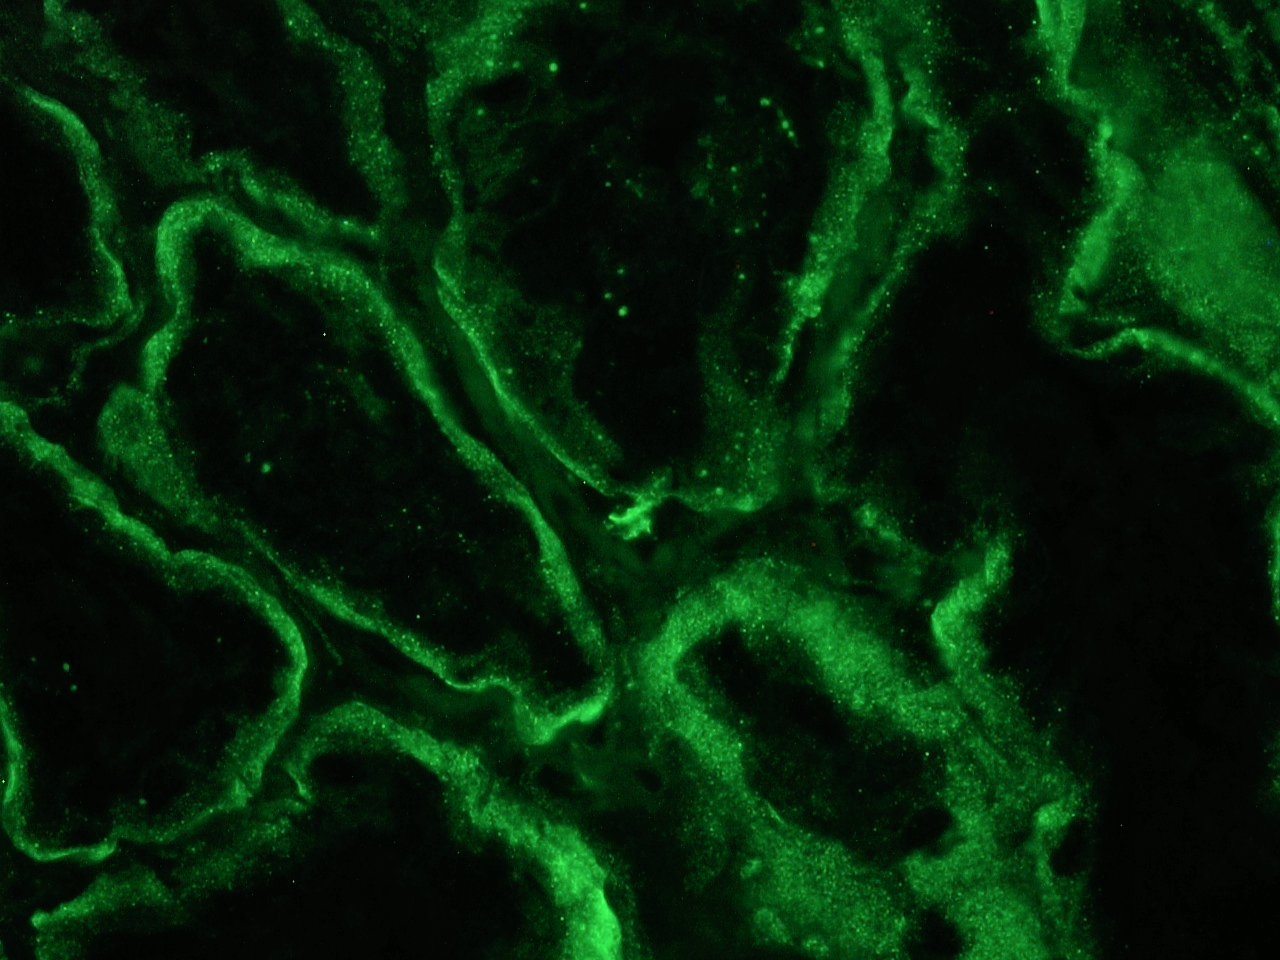 Figure 1: Integrin alpha 6B immunostaining of the basolateral membrane of epithelial cells in a frozen section of human kidney using MUB0905P at a 1:50 dilution.